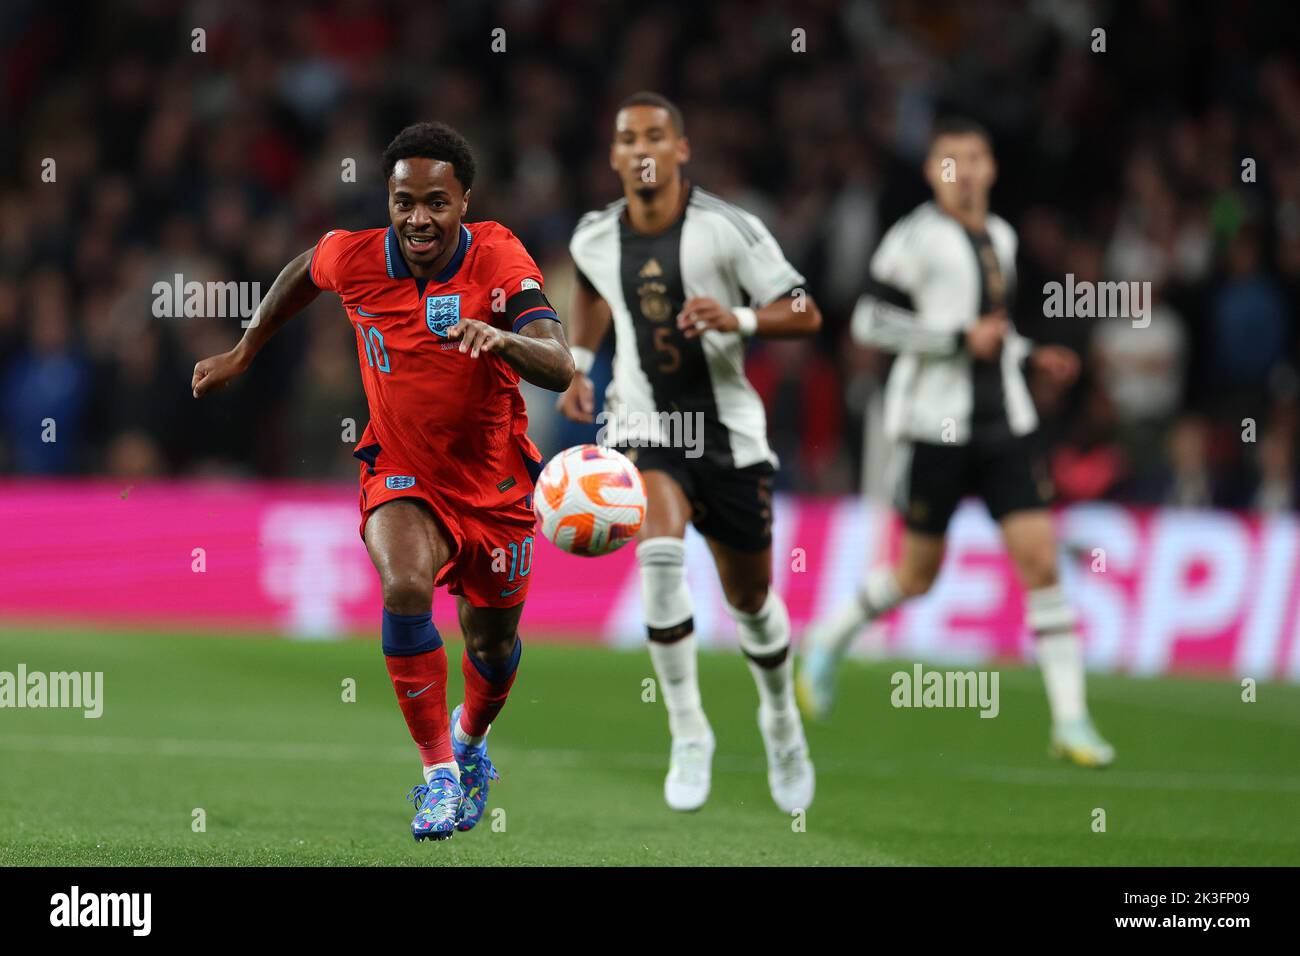 London, UK. 26th Sep, 2022. Raheem Sterling of England in action. England v Germany, UEFA Nations league International group C match at Wembley Stadium in London on Monday 26th September 2022. Editorial use only. pic by Andrew Orchard/Andrew Orchard sports photography/Alamy Live News Credit: Andrew Orchard sports photography/Alamy Live News Stock Photo